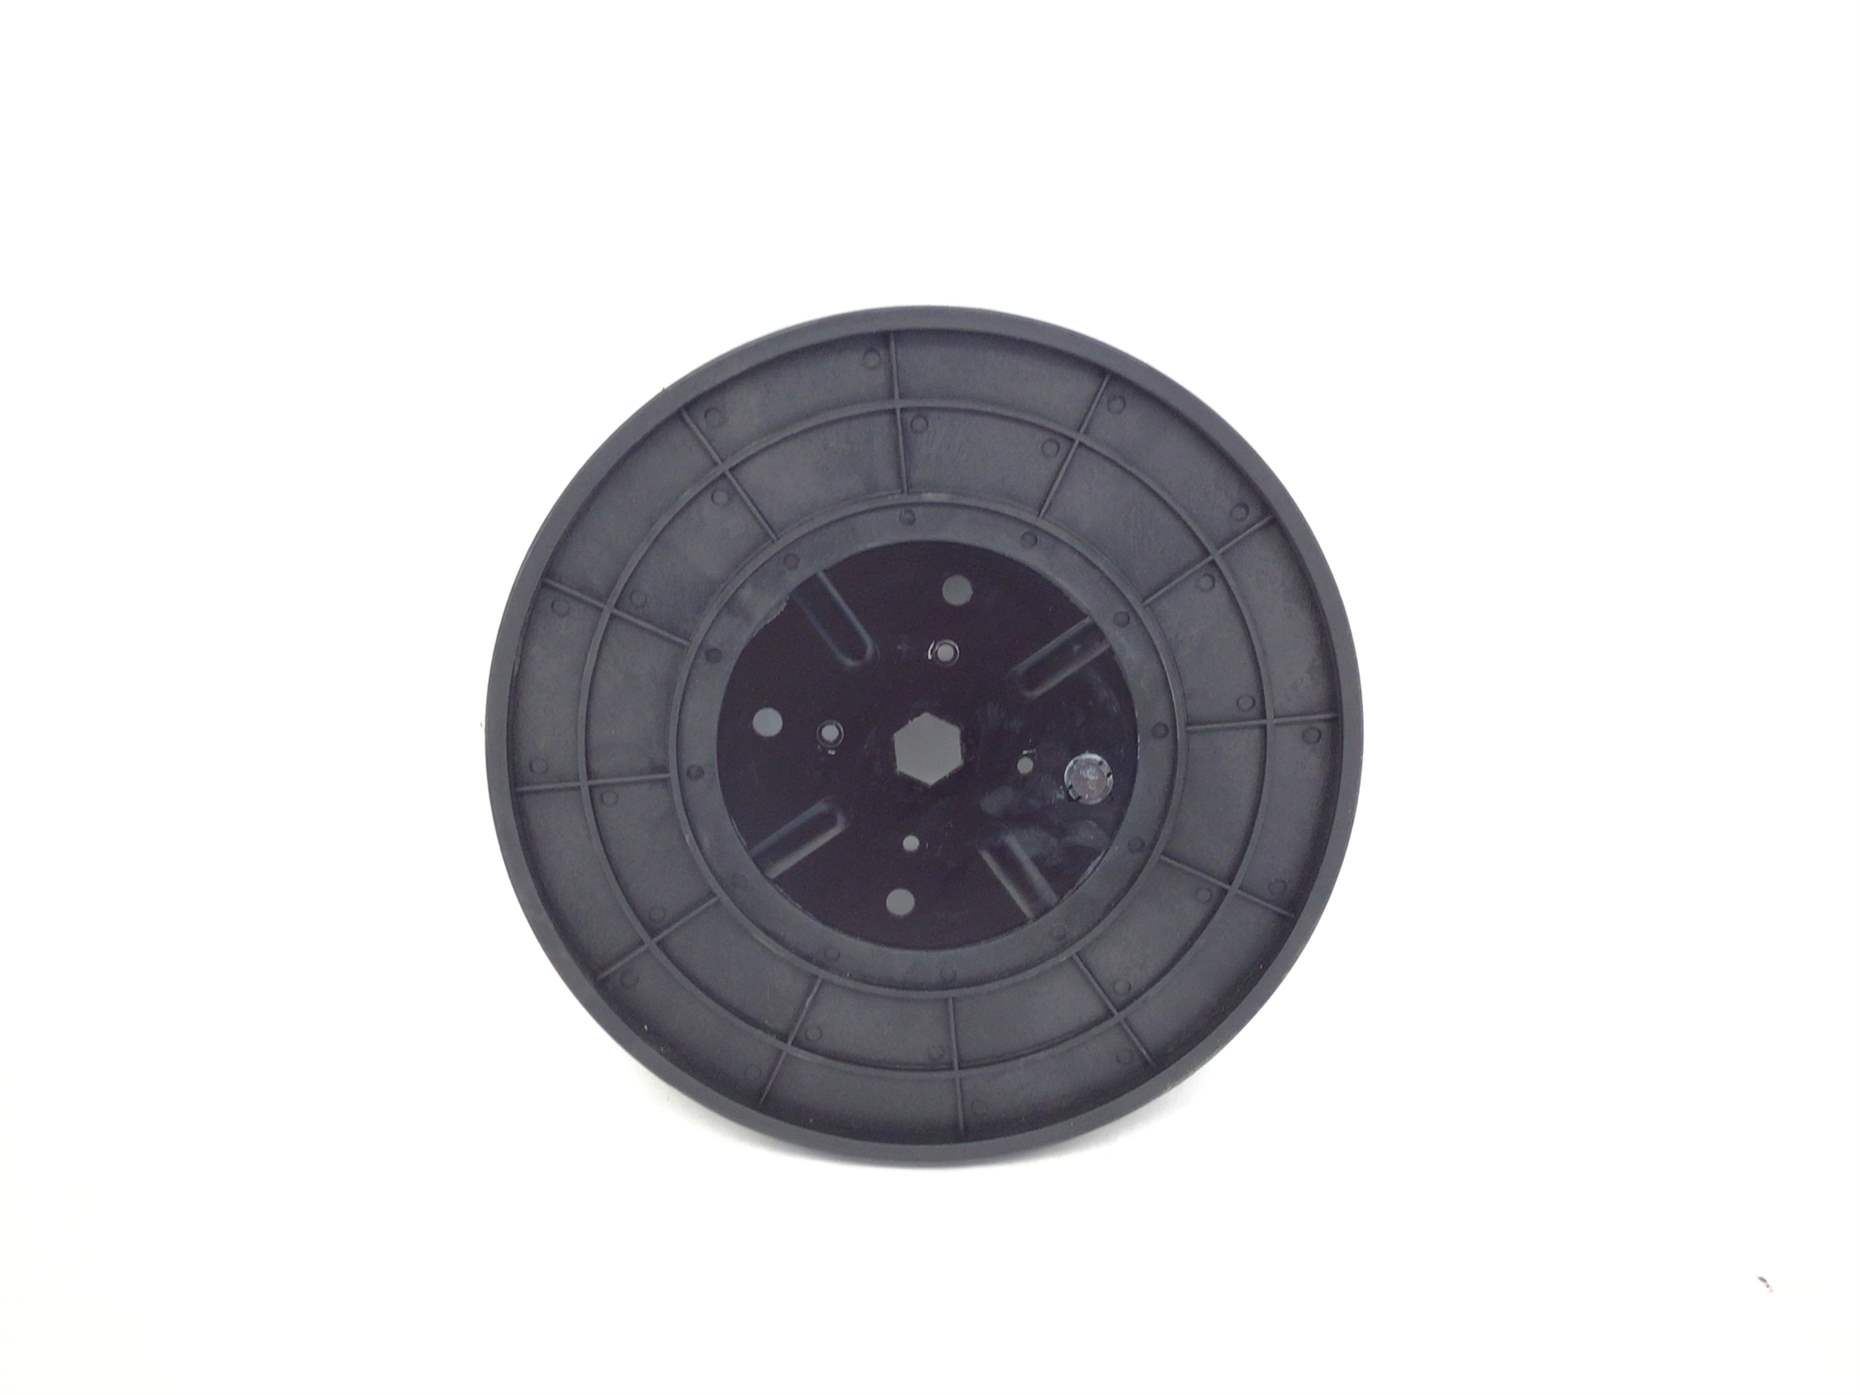 Drive Main Pulley (Used)